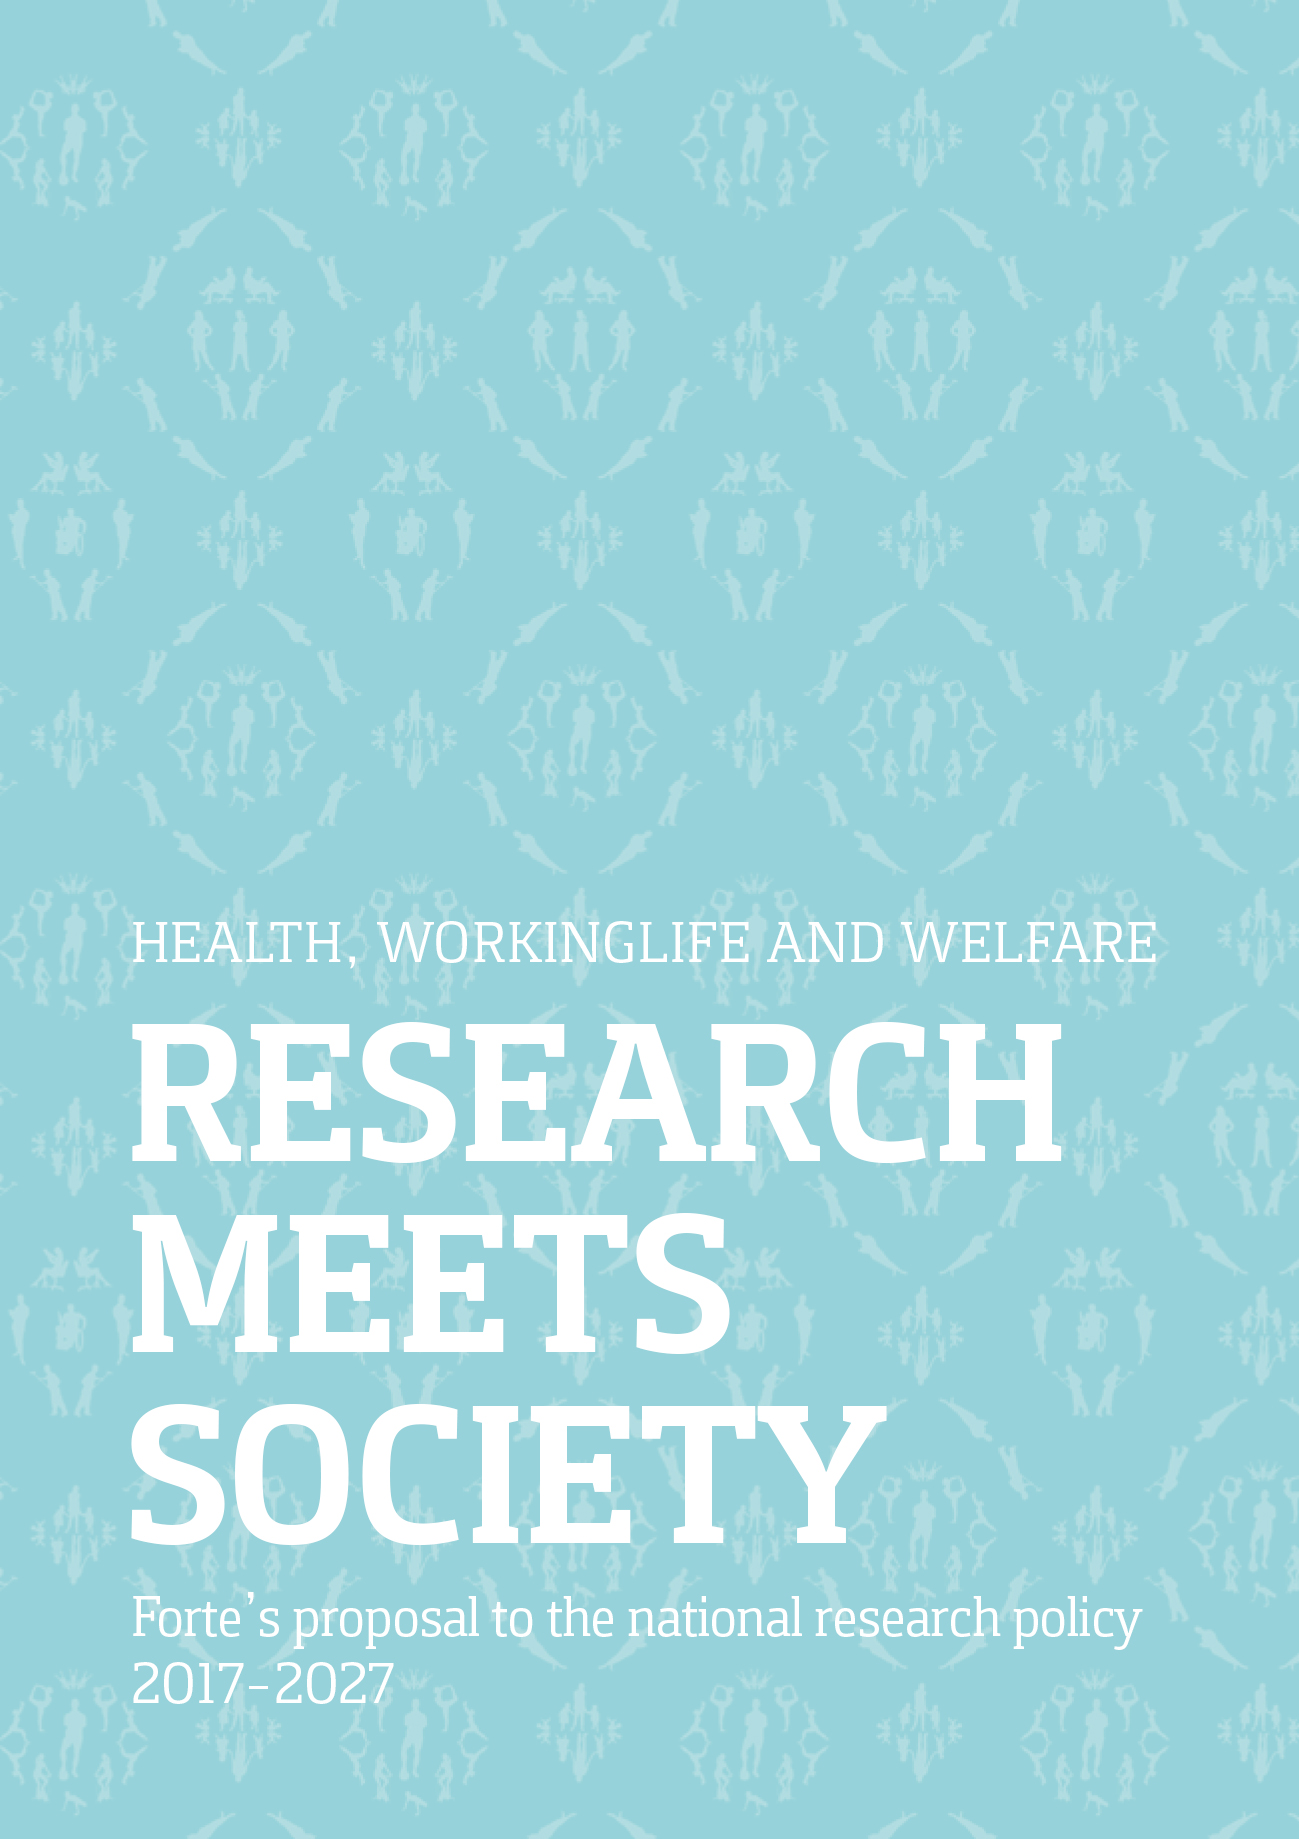 Research meets society